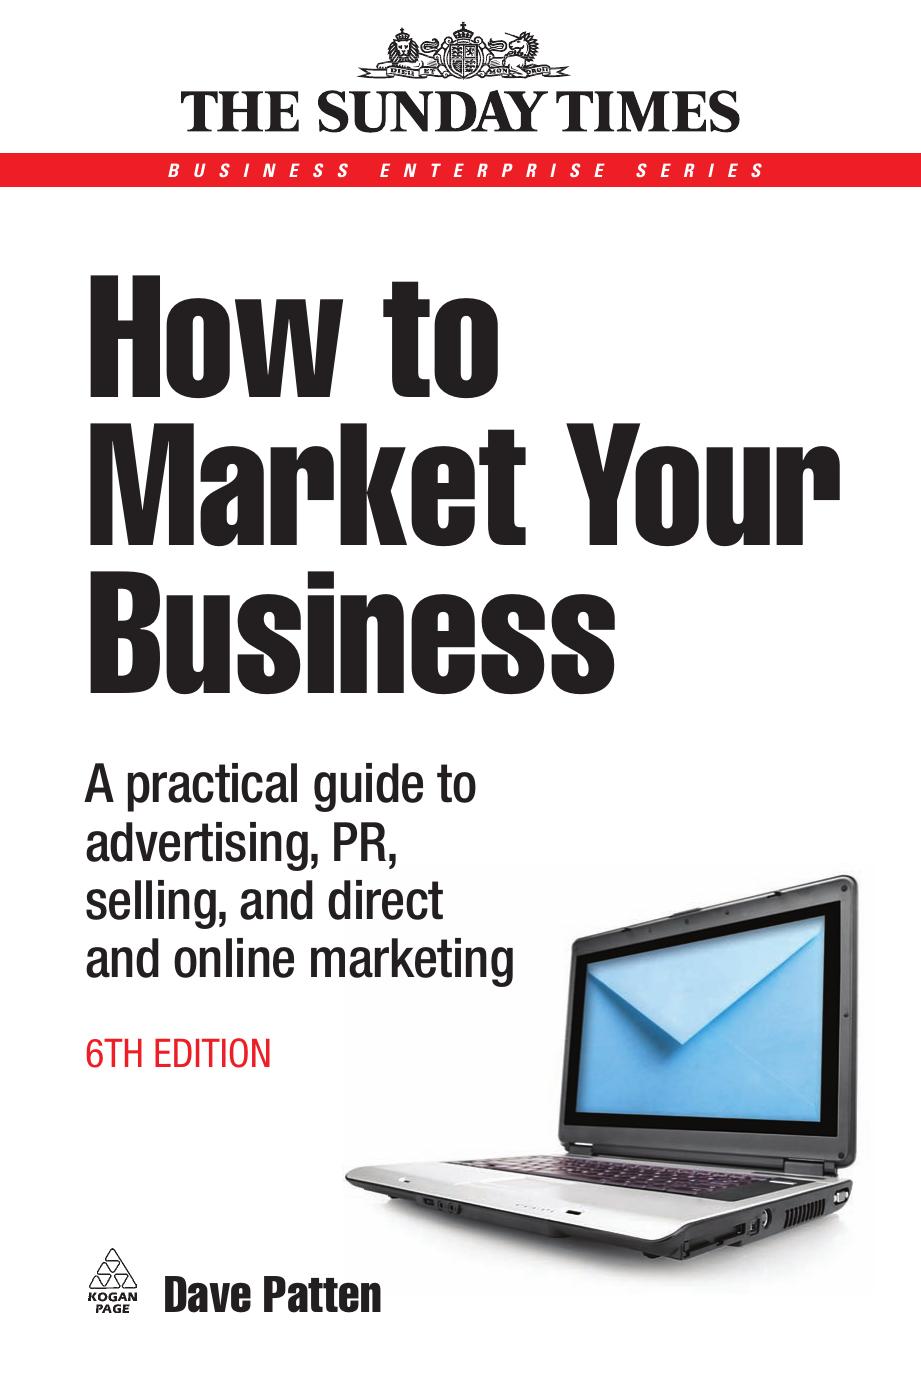 [Dave Patten] How to Market Your Business A Pract(BookZZ.org)